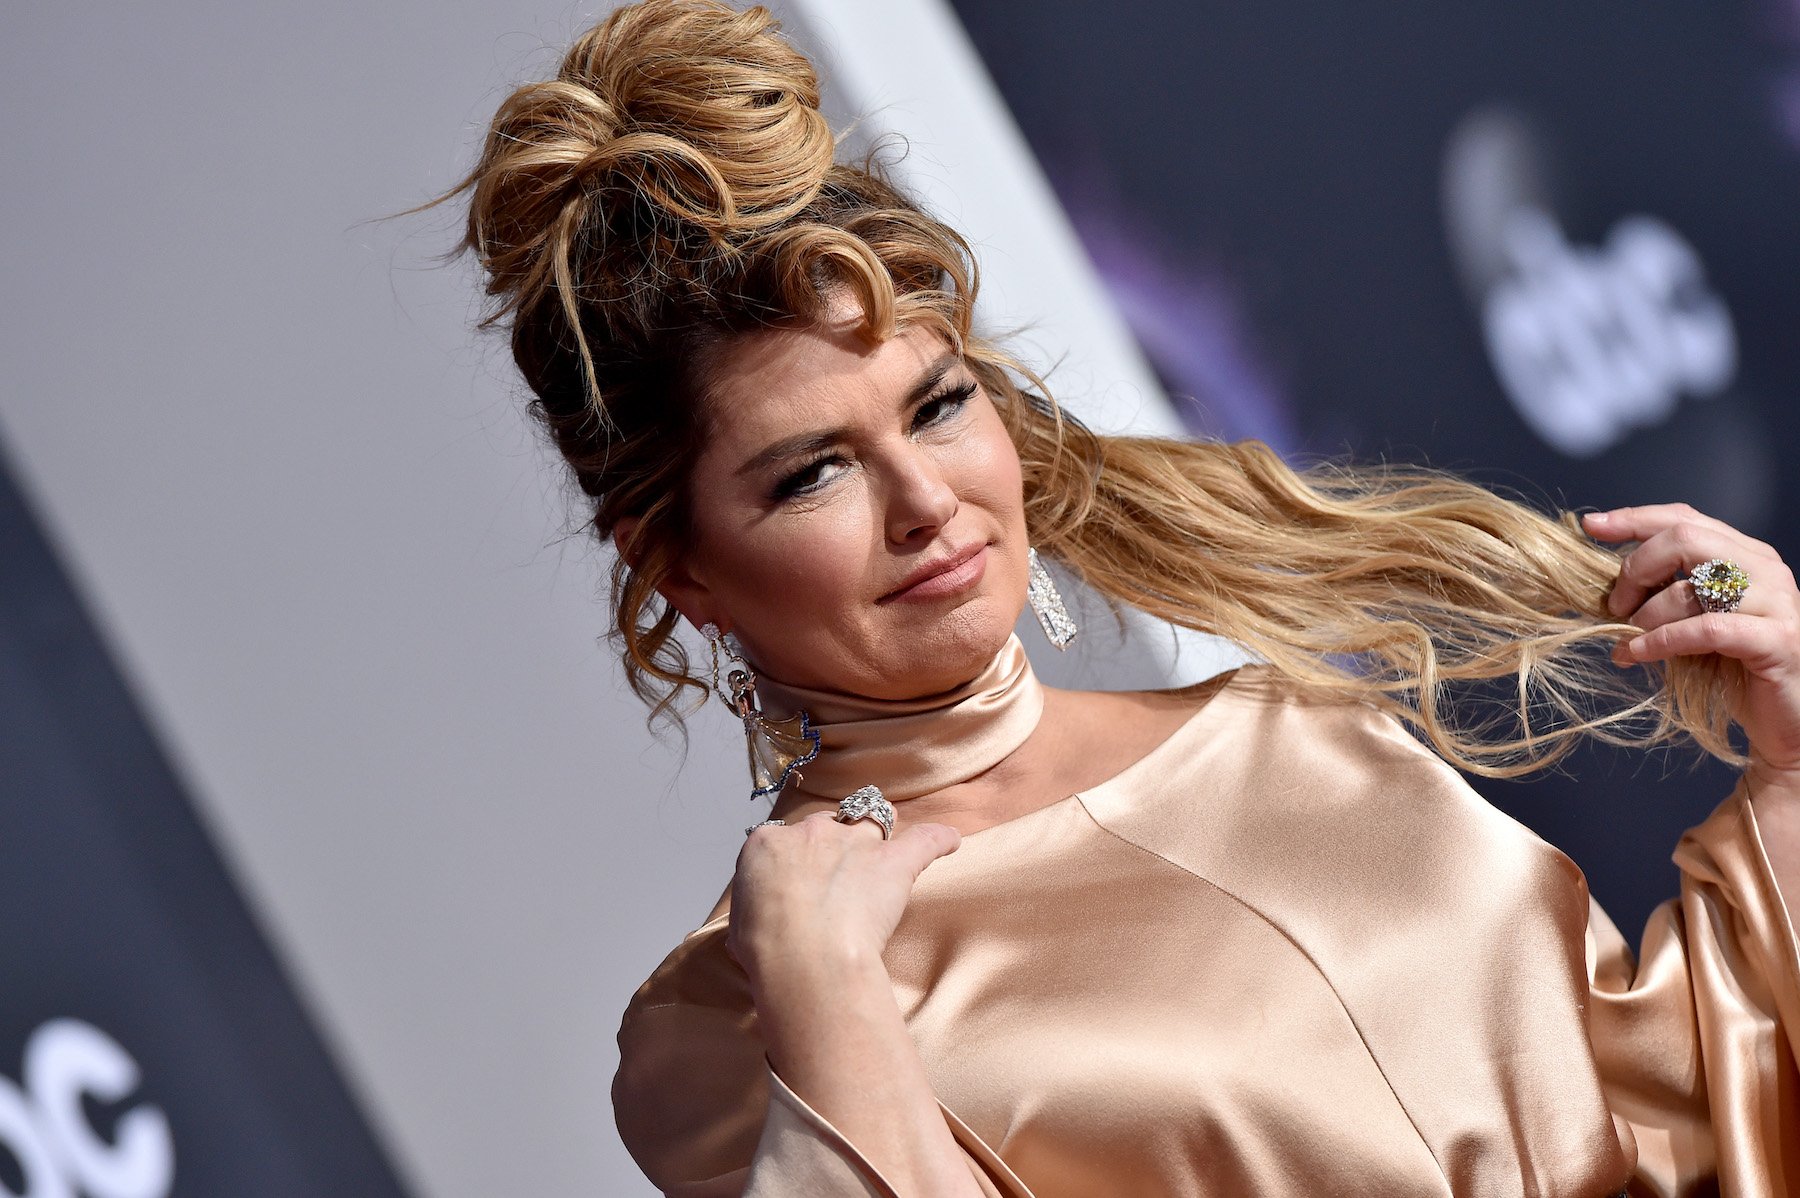 Shania Twain, who once became friends with a childhood bully, posing for a photo